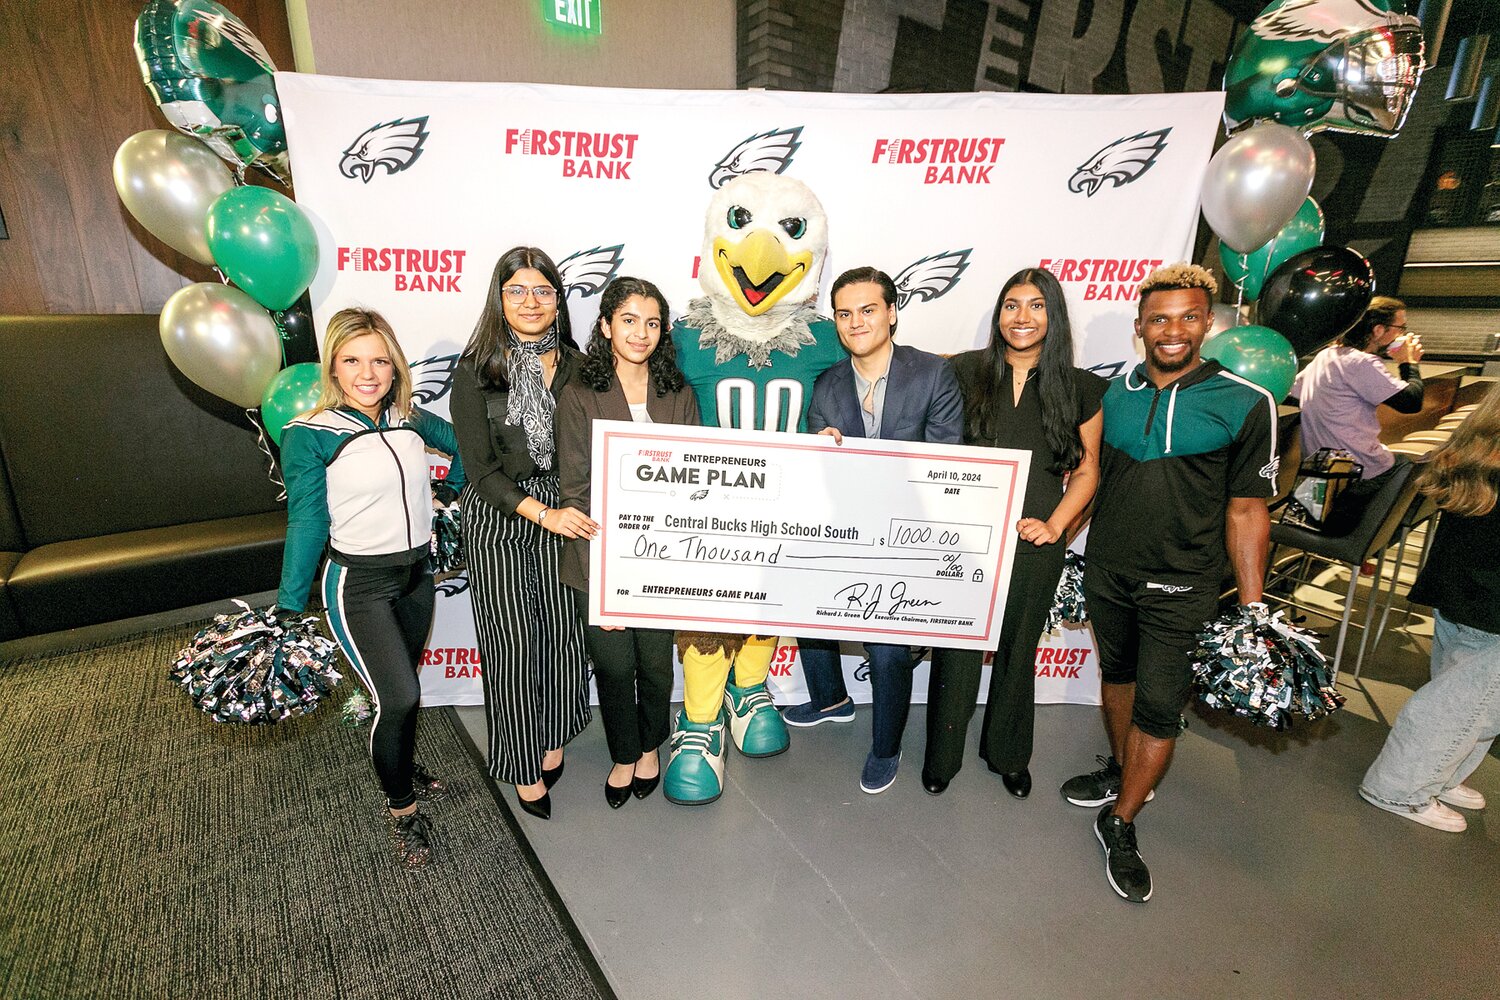 Students from Central Bucks South finished third in a business pitch competition hosted by Firstrust Bank and the Philadelphia Eagles.